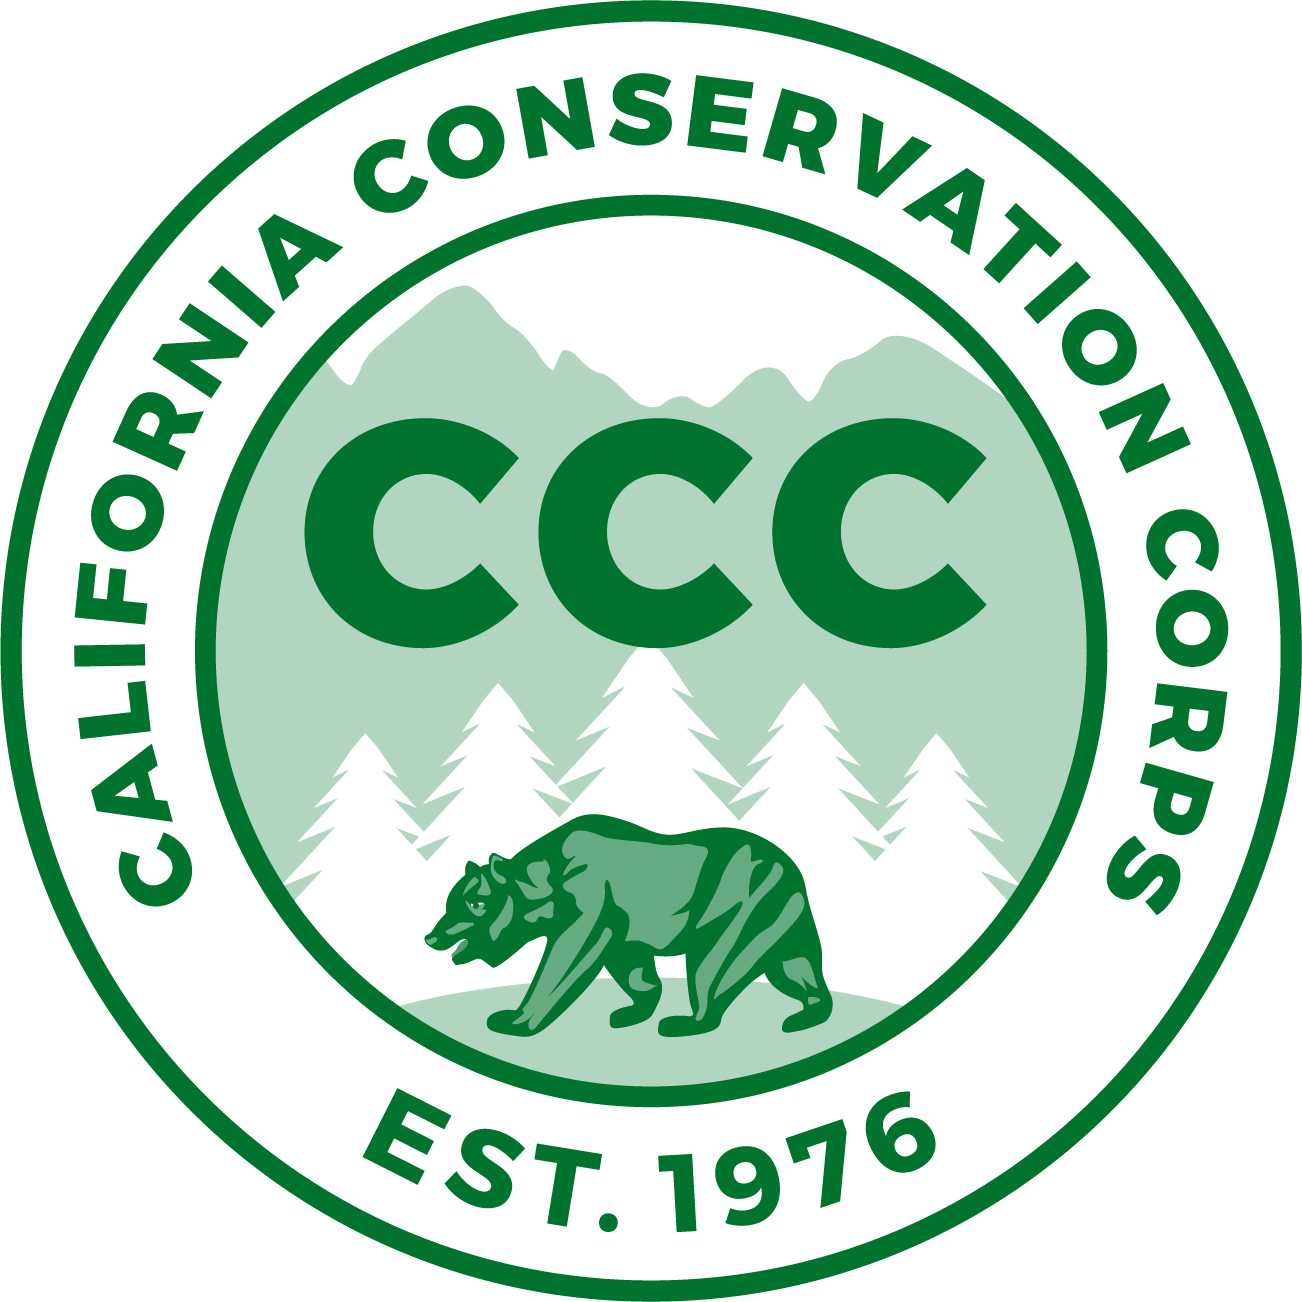 CCC logo, reads California Conservation Corps, established 1976. CCC, featuring mountains, pine trees and a grizzly bear